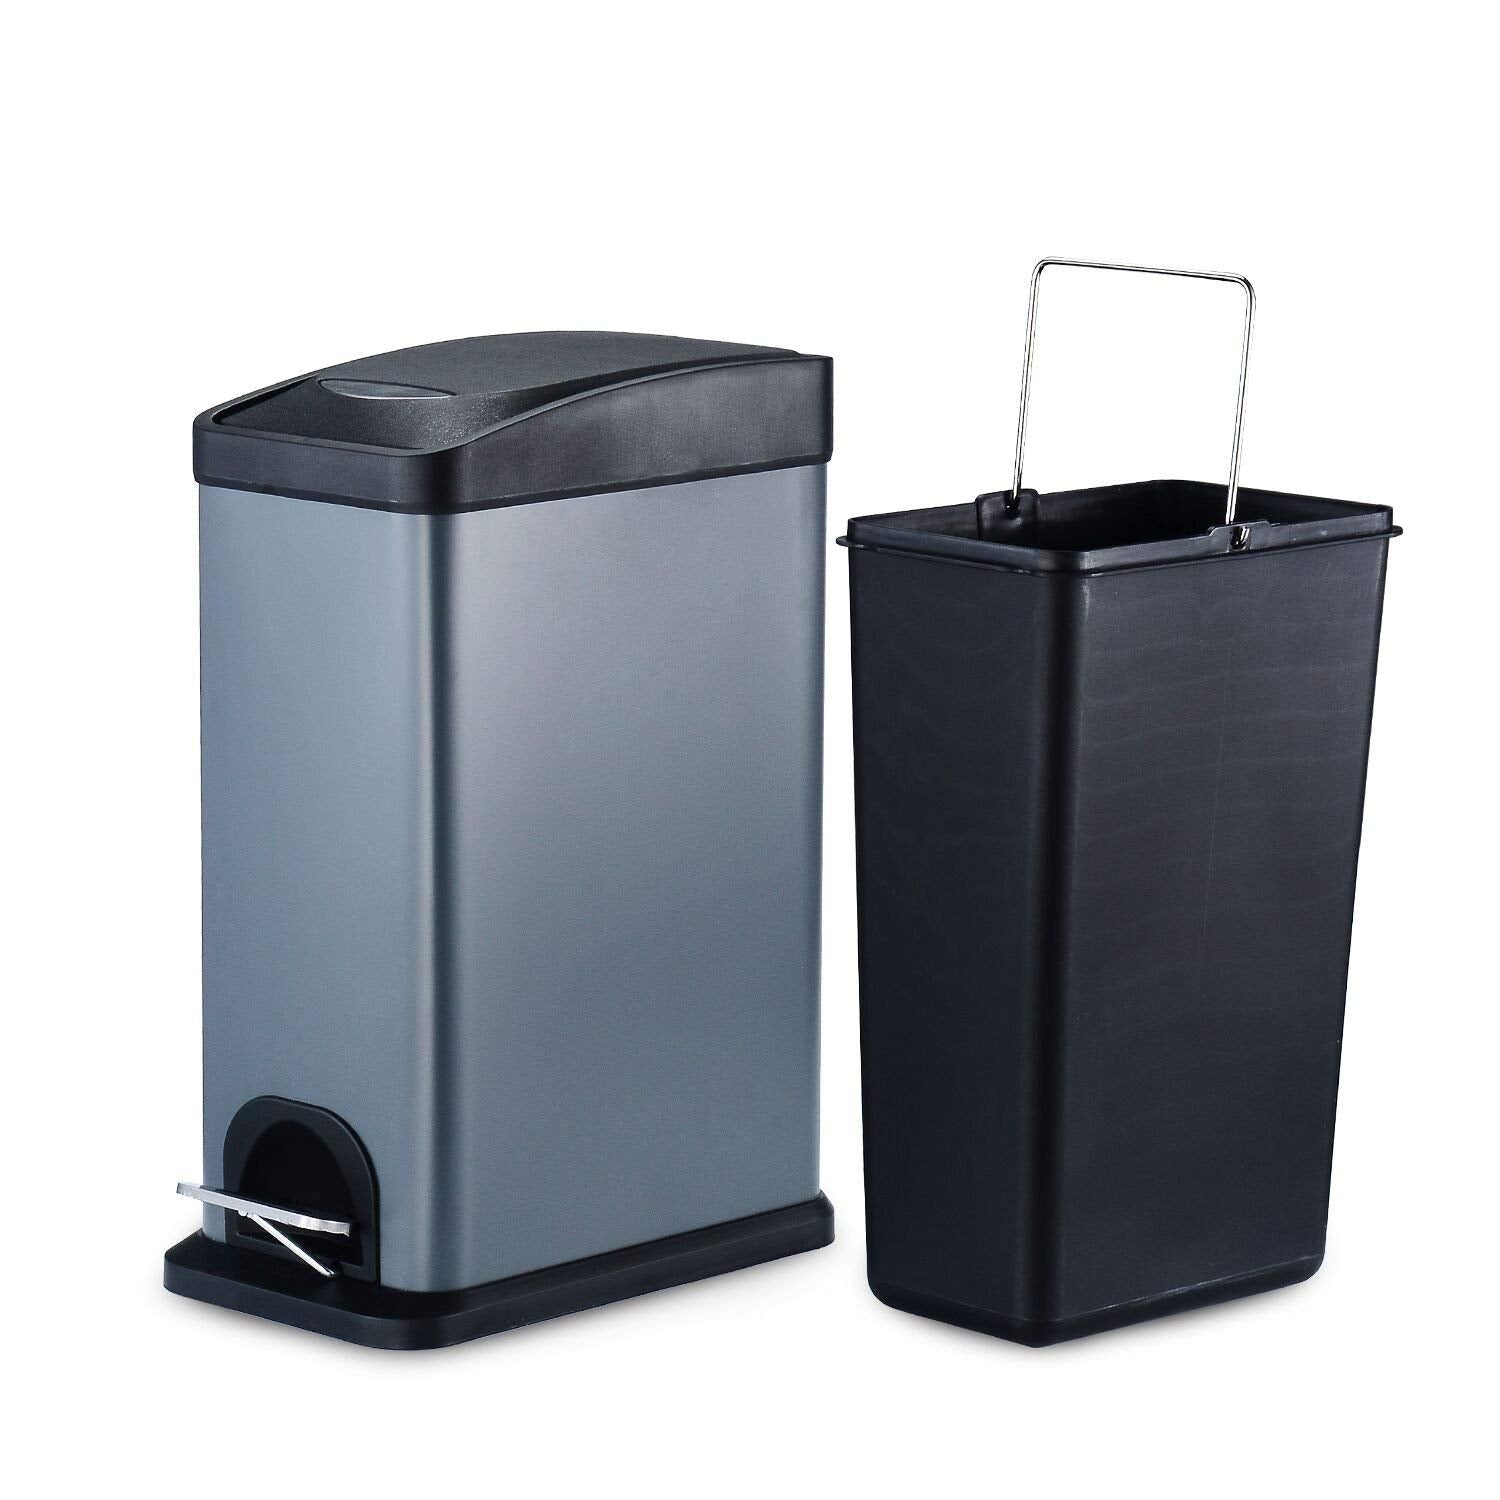 8 Liter / 2.1 Gallon Step Trash Can,Carbon Steel Garbage Can with Lid and Plastic Inner Bucket for Bathroom (Gray)